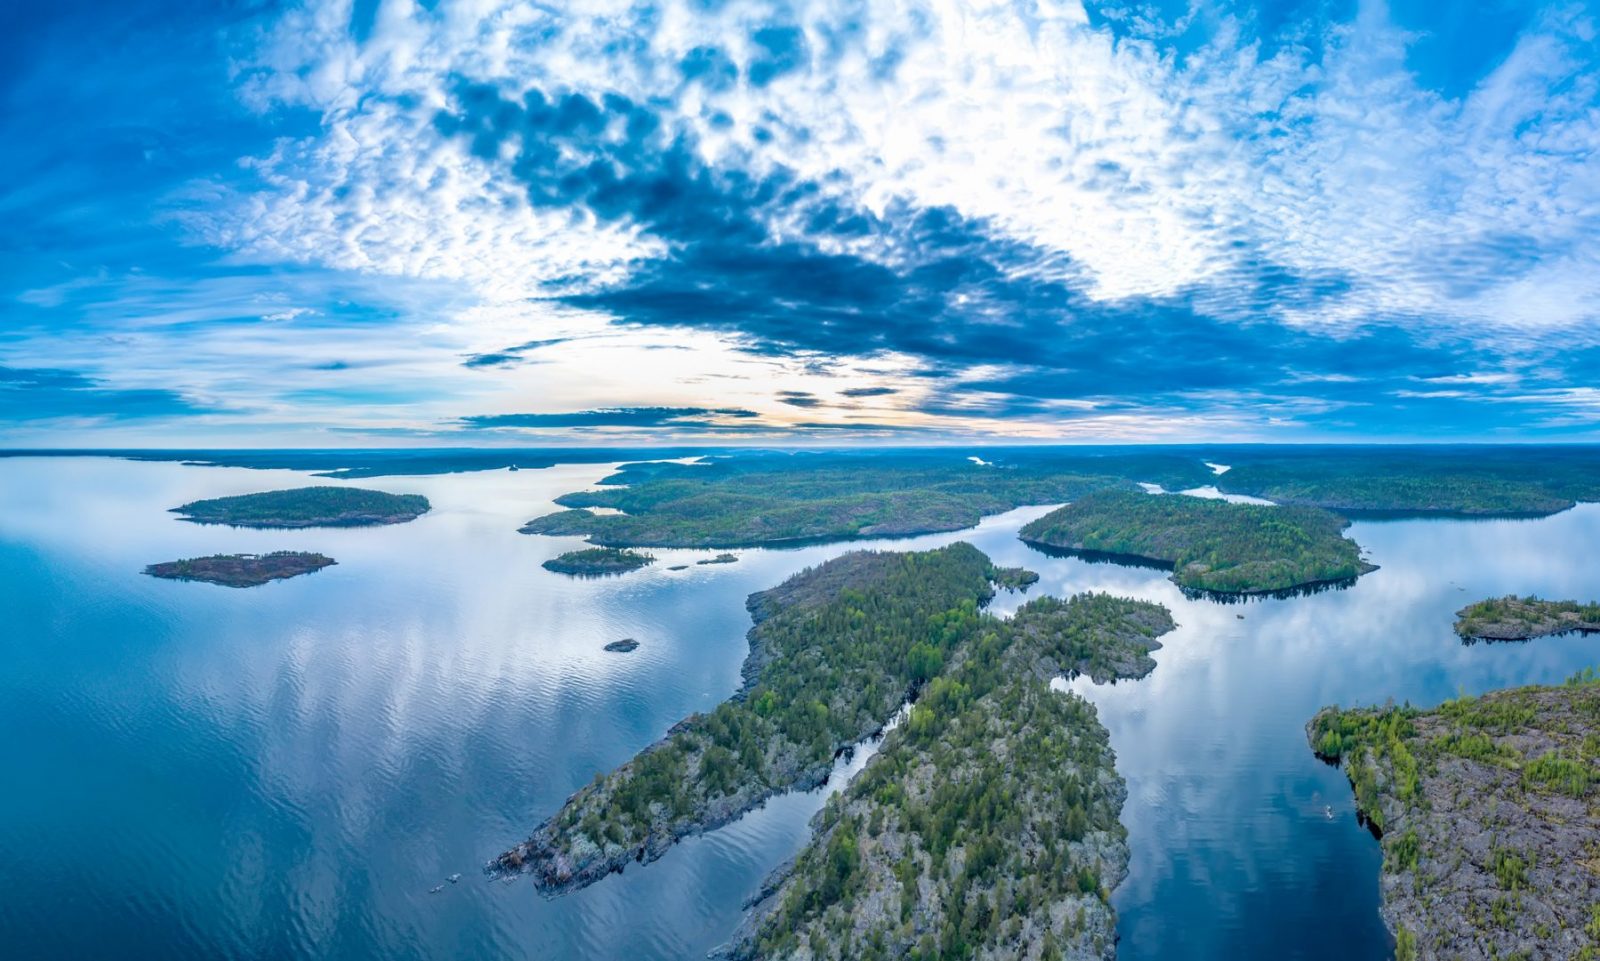 Can You Pass This Impossible Geography Quiz? Lake Ladoga, Russia